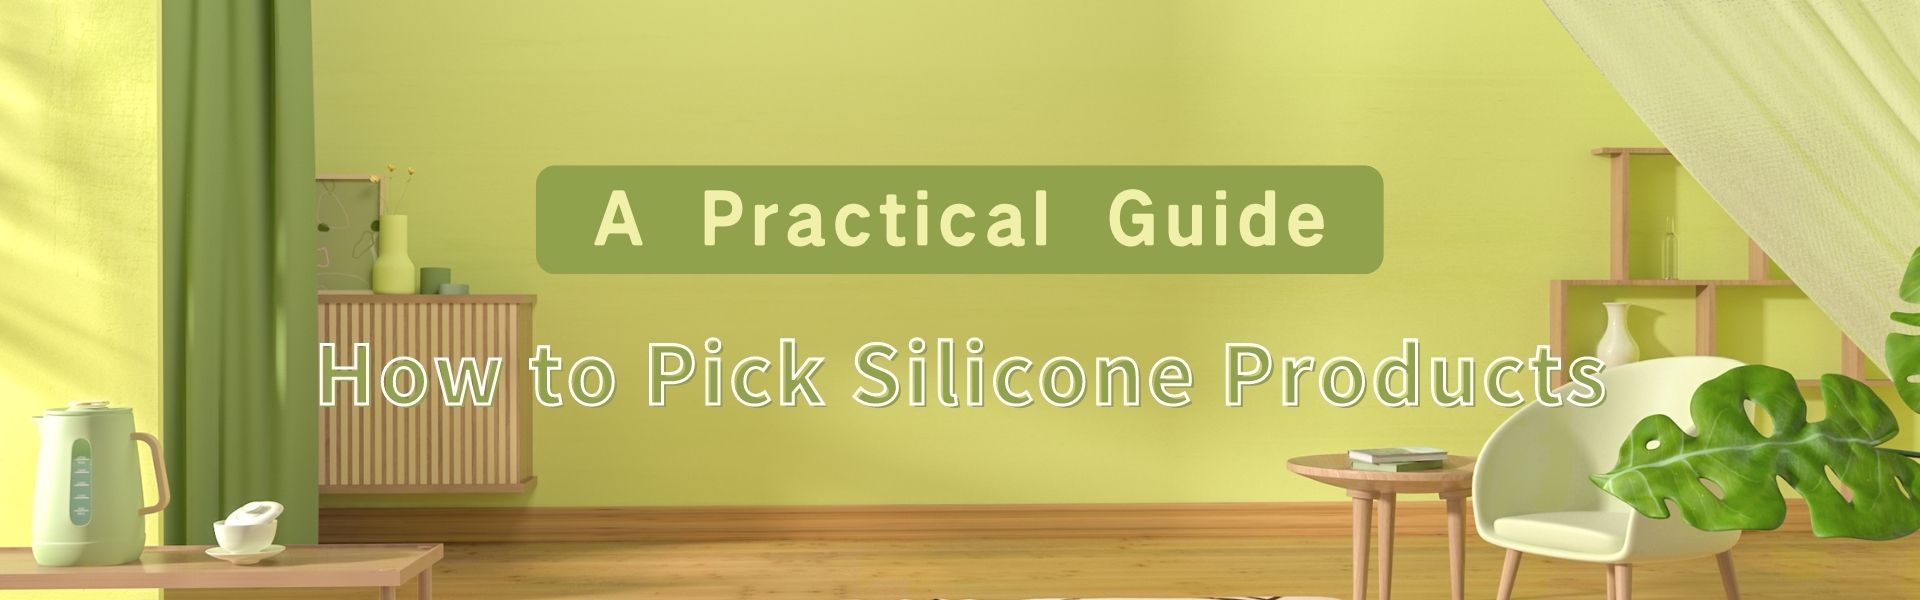 A Practical Guide: How to Pick Silicone Products